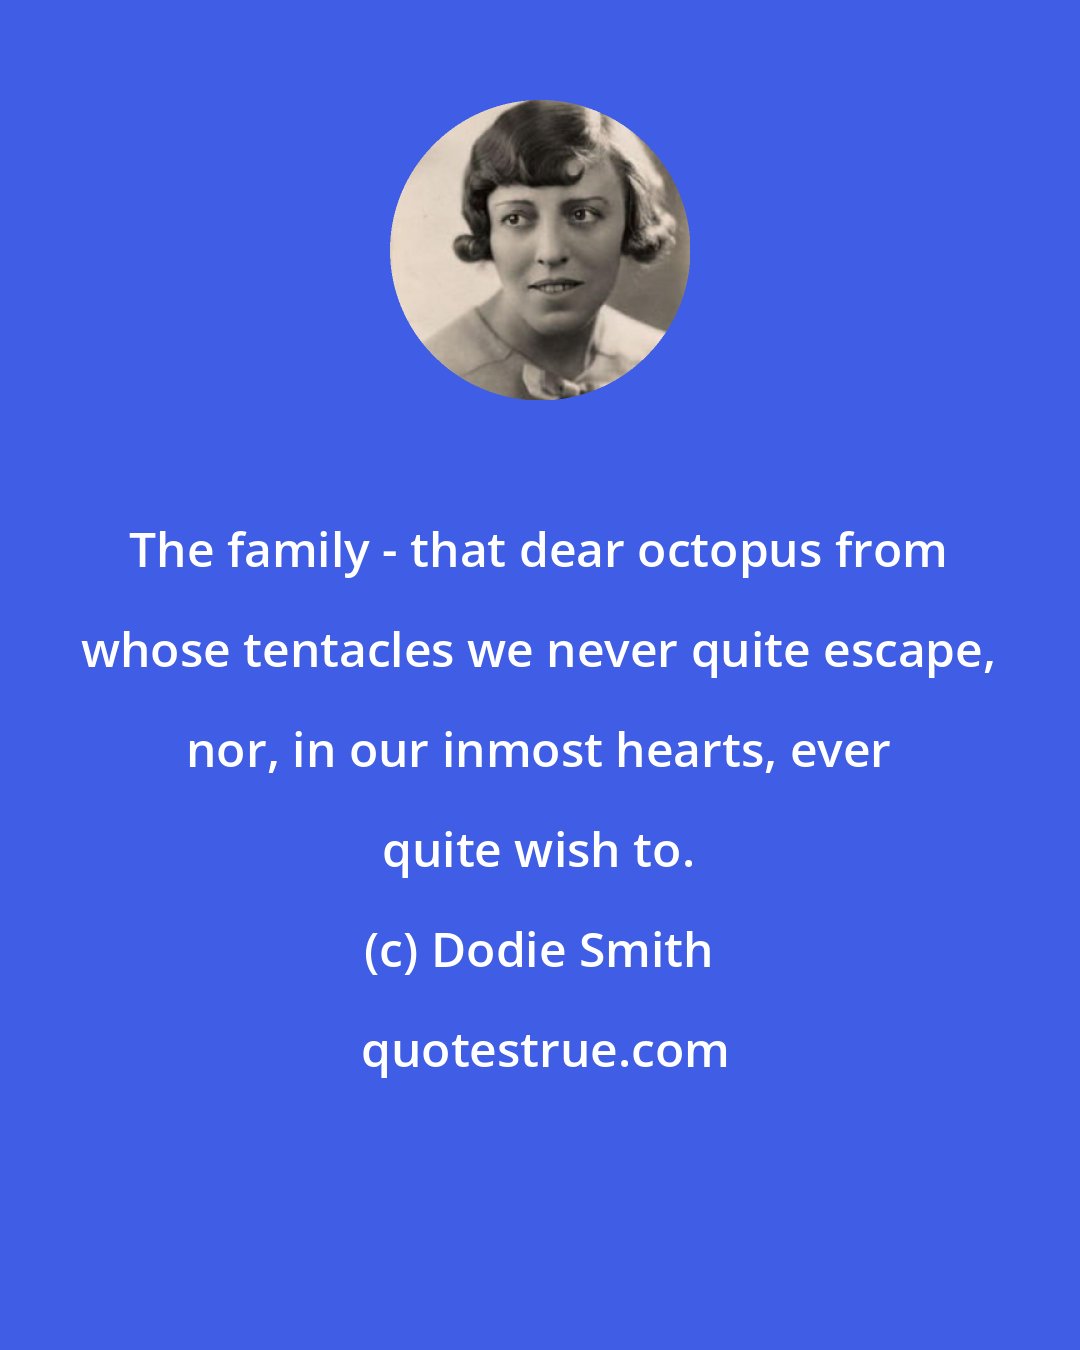 Dodie Smith: The family - that dear octopus from whose tentacles we never quite escape, nor, in our inmost hearts, ever quite wish to.